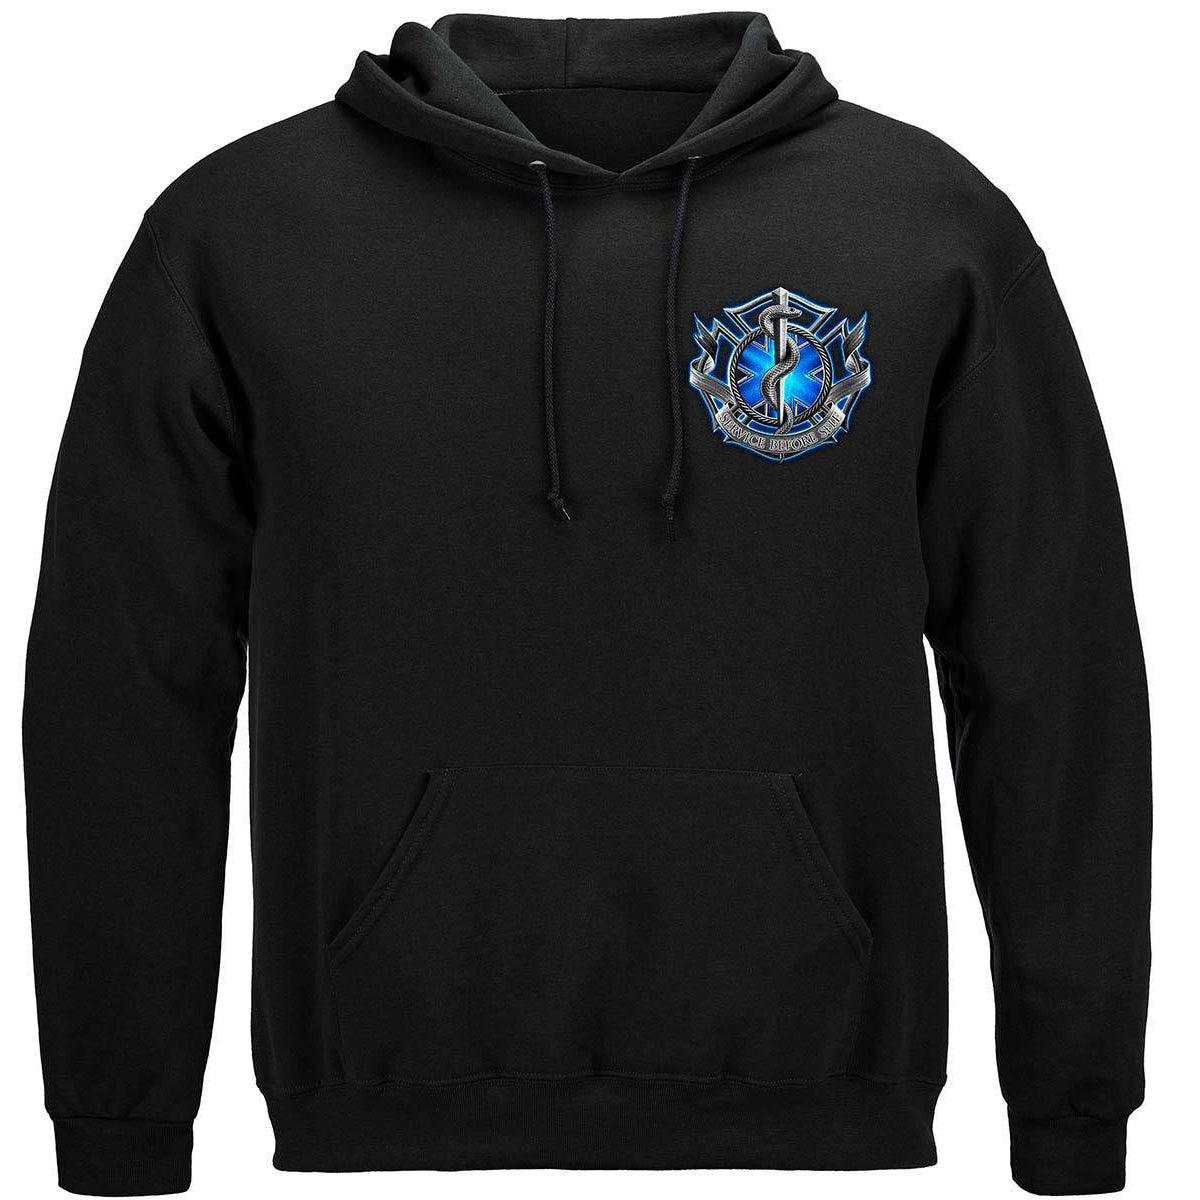 Fire Rescue Firefighter Hoodie - Military Republic